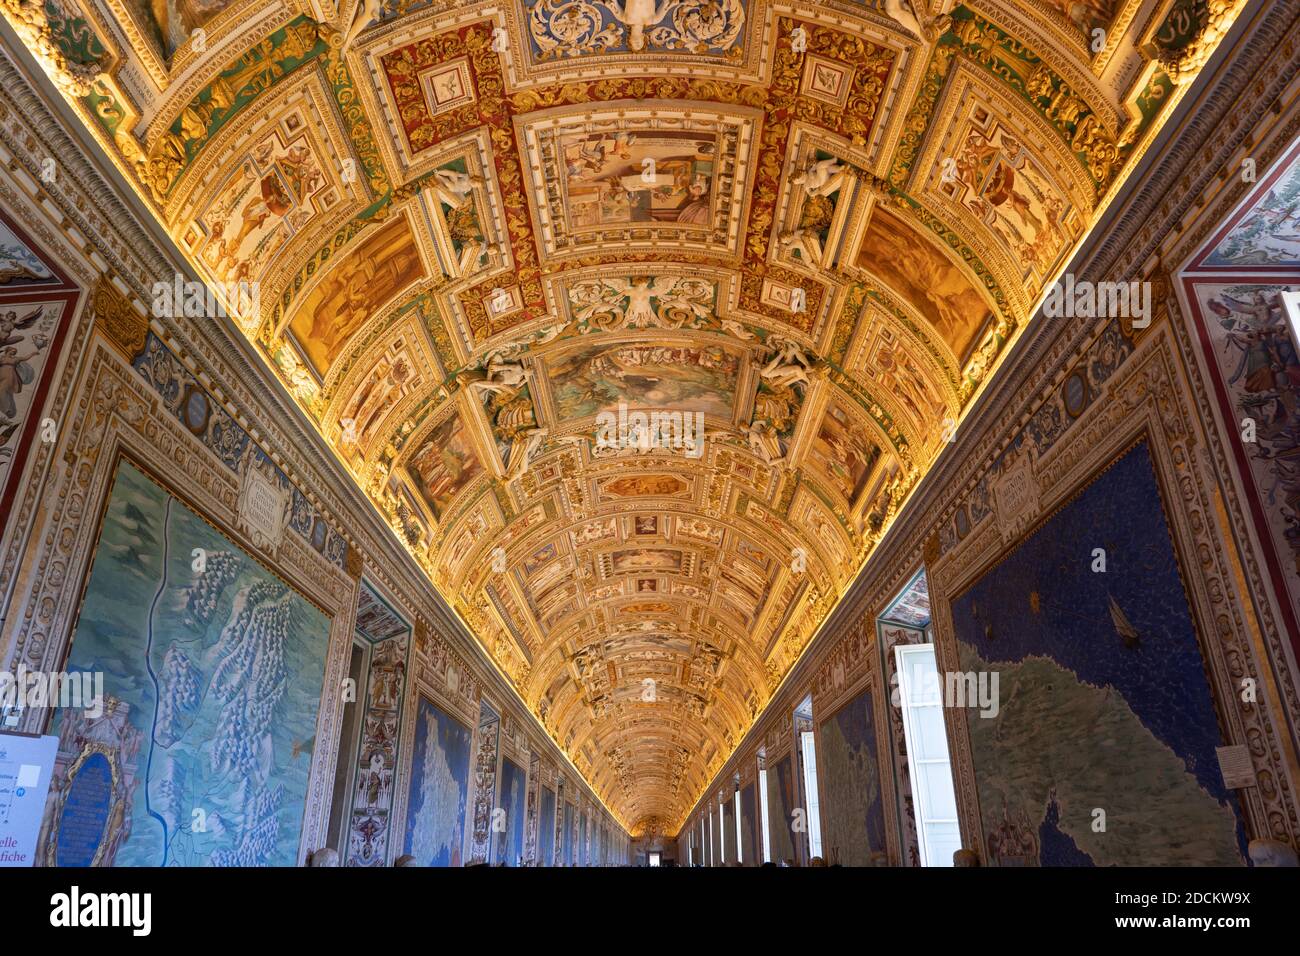 Gallery of Maps (Galleria delle carte geografiche) or Map Room vaulted ceiling in Papal Palace, Vatican Museums, Rome, Italy Stock Photo